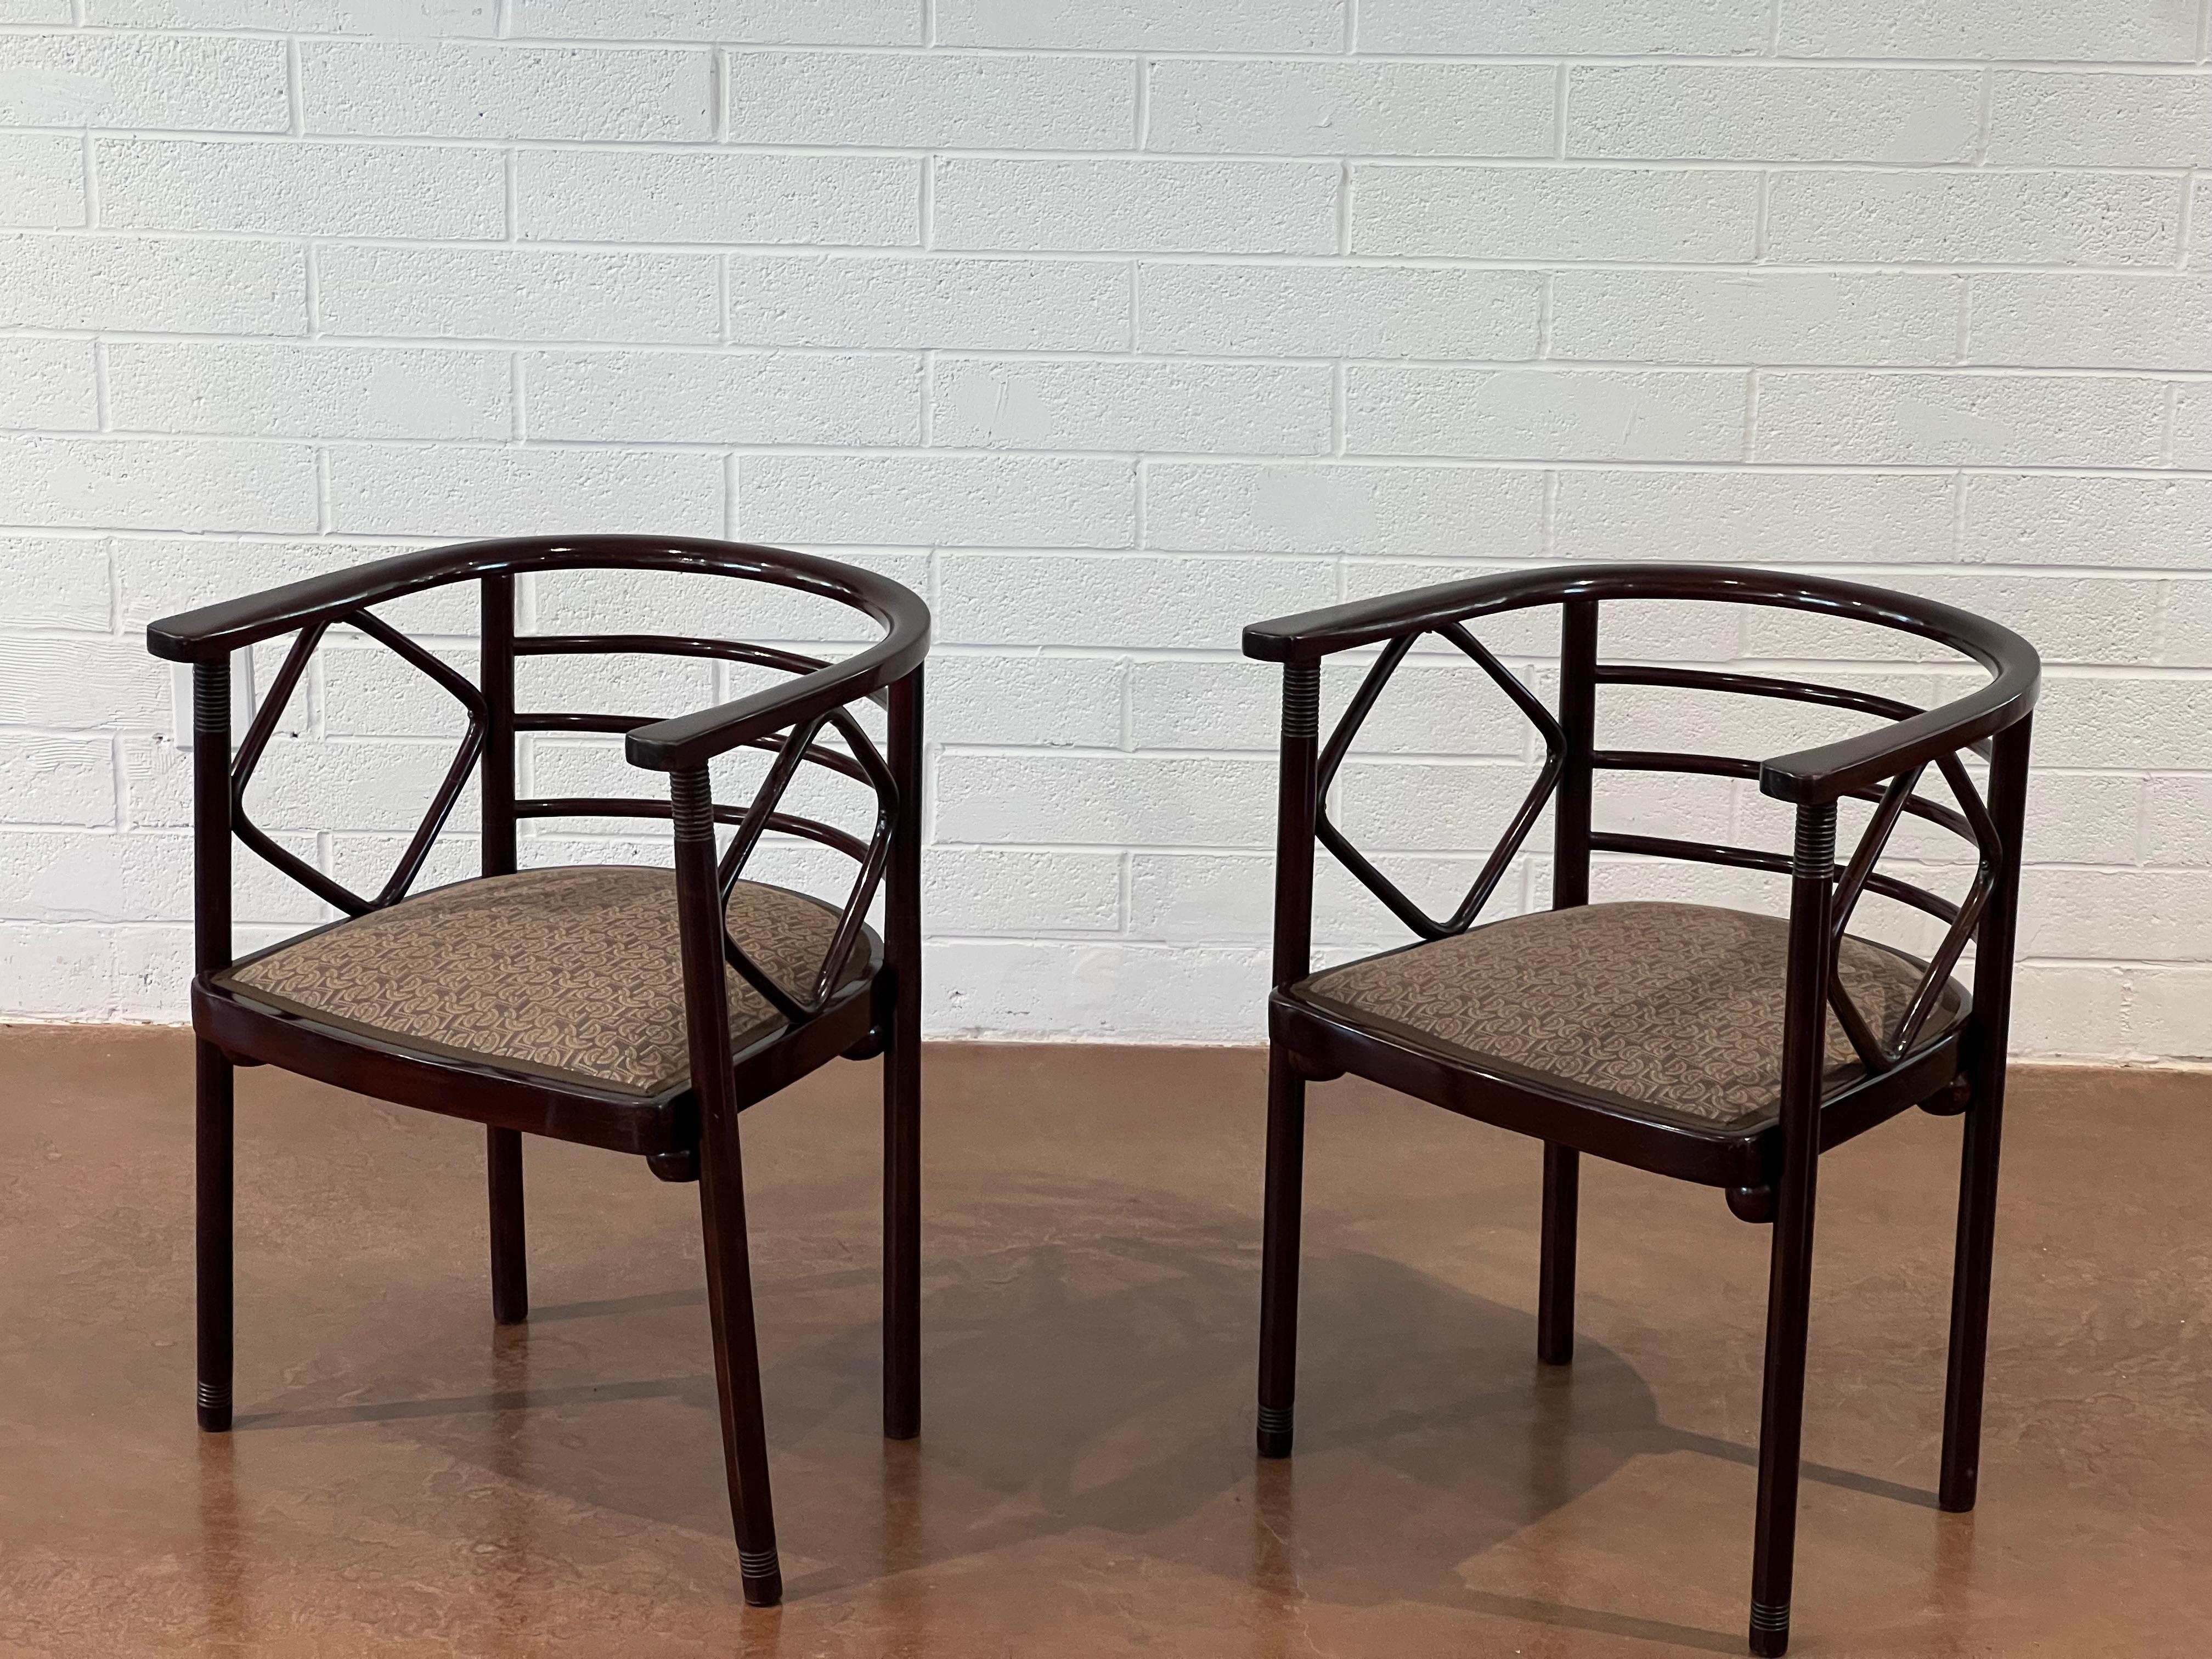 Pair of late 19th century armchairs designed by Josef Hoffman for J&J Kohn. 